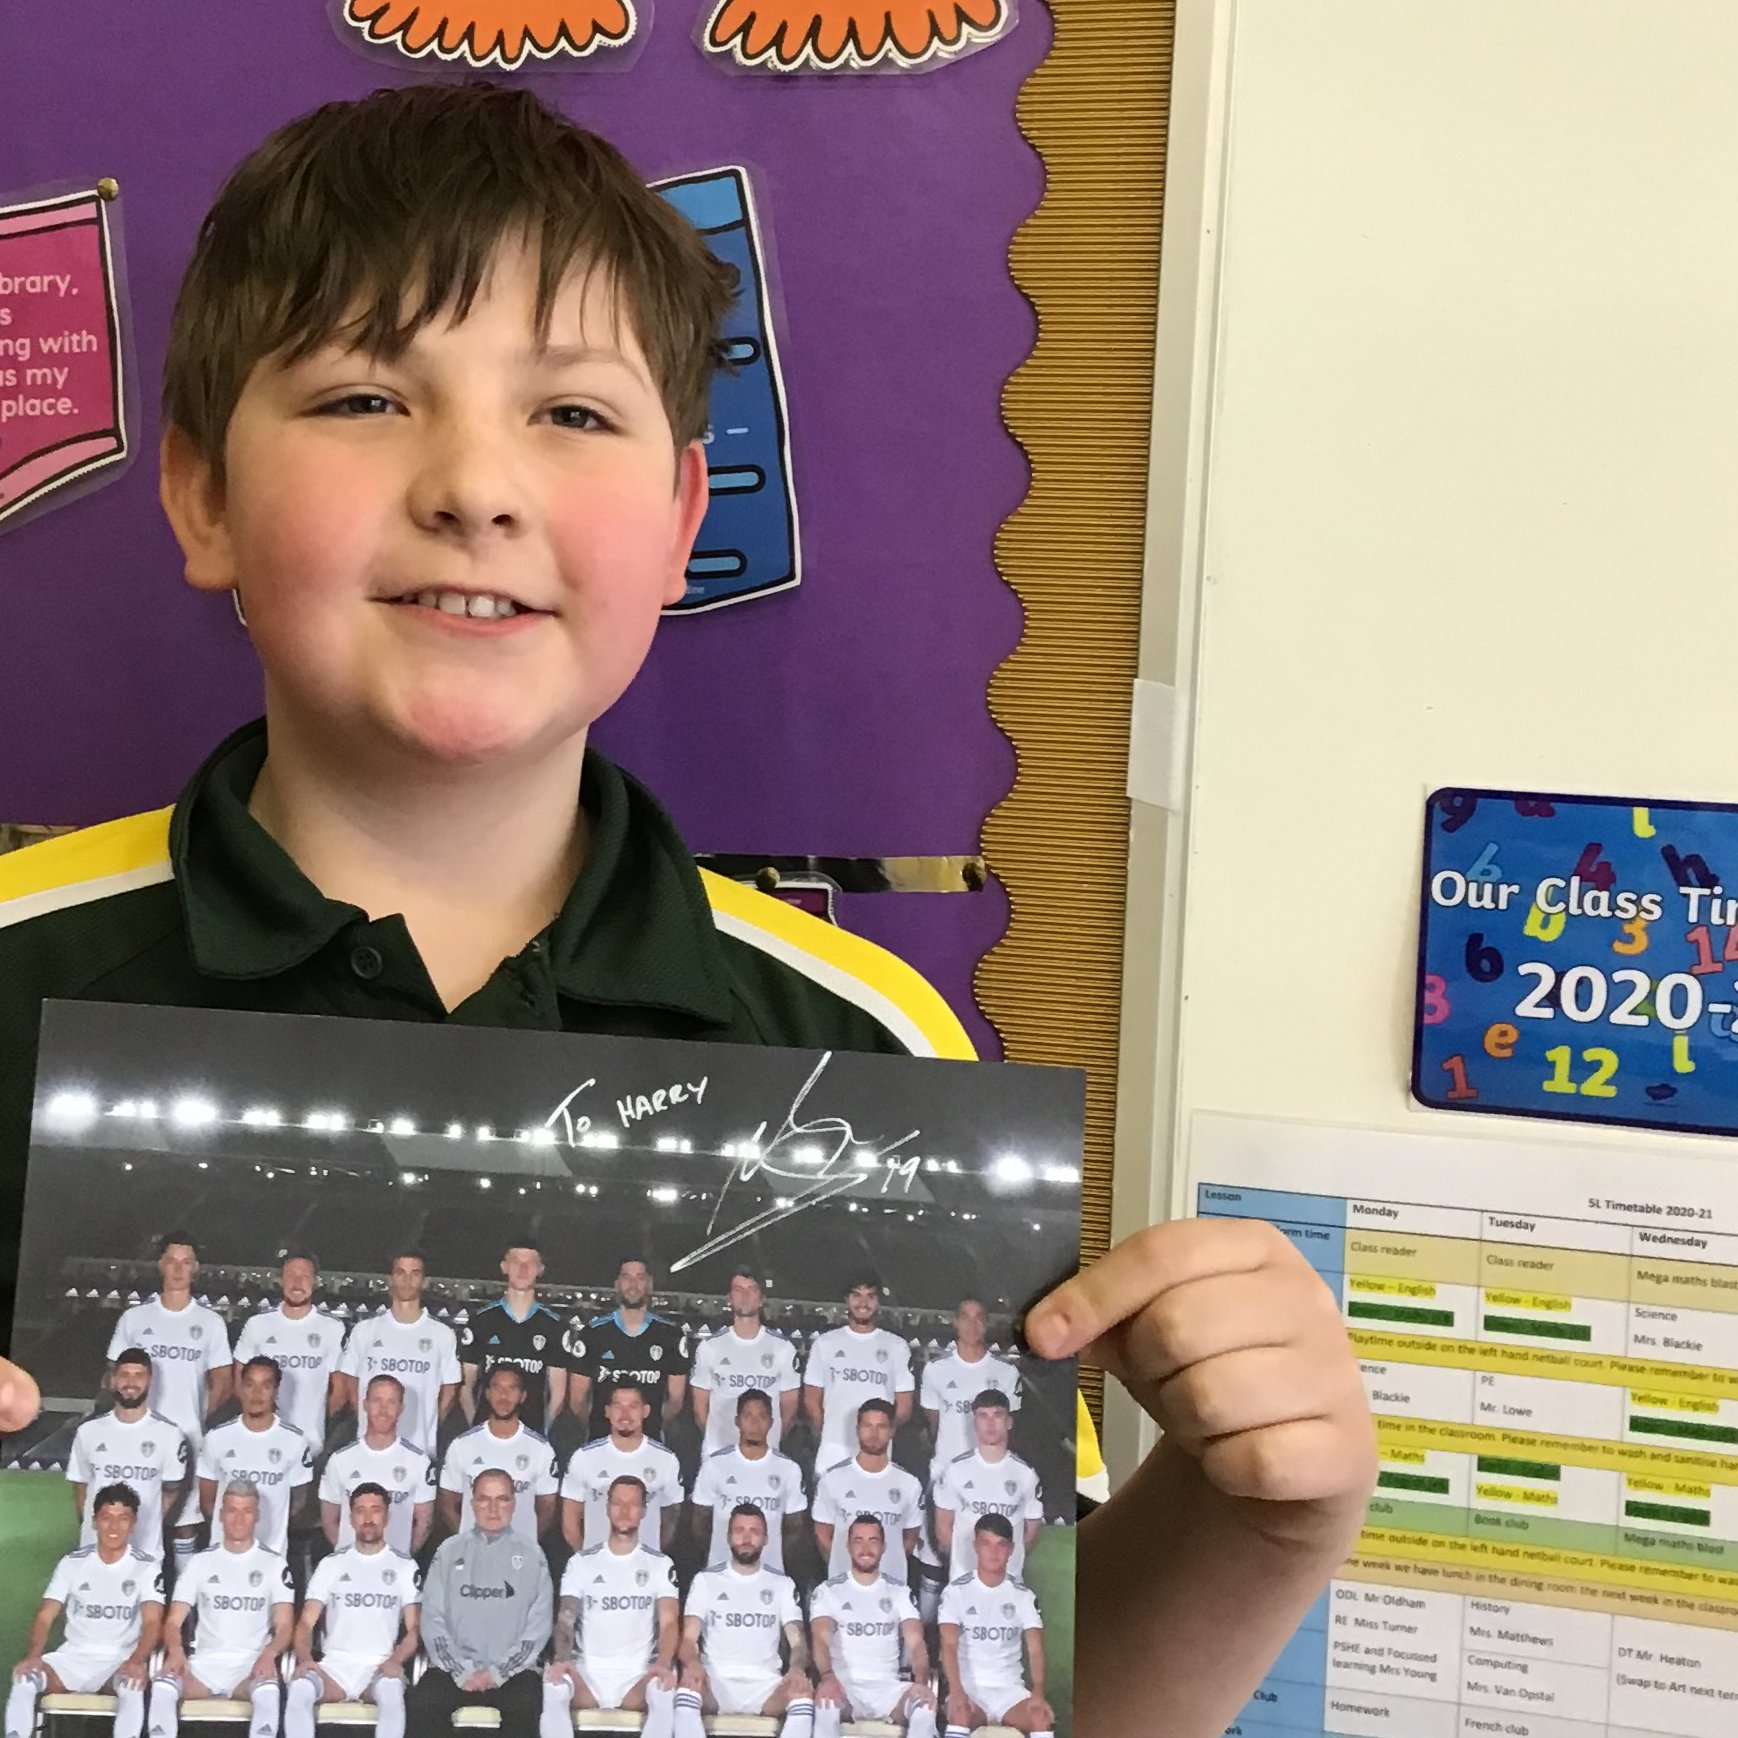 Richmond House School Thank You So Much To Pablo Hernandez And Lufc For The Signed Picture Sent To Harry In Year 5 He Wrote A Superb Persuasive Letter In His